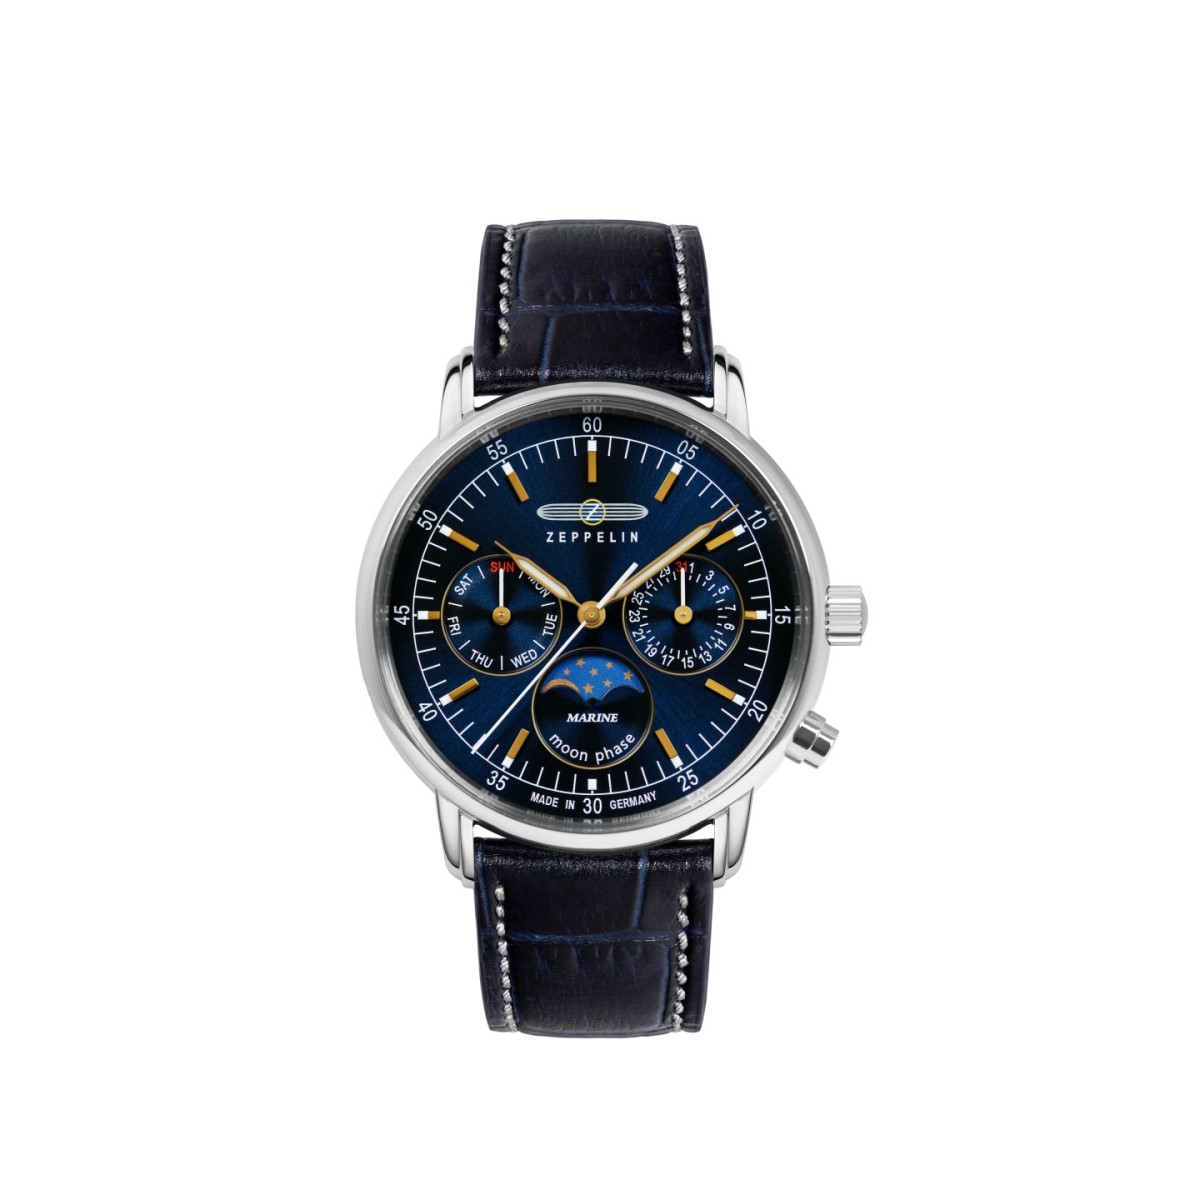 Zeppelin LZ 14 Marine with moon phase and leather strap